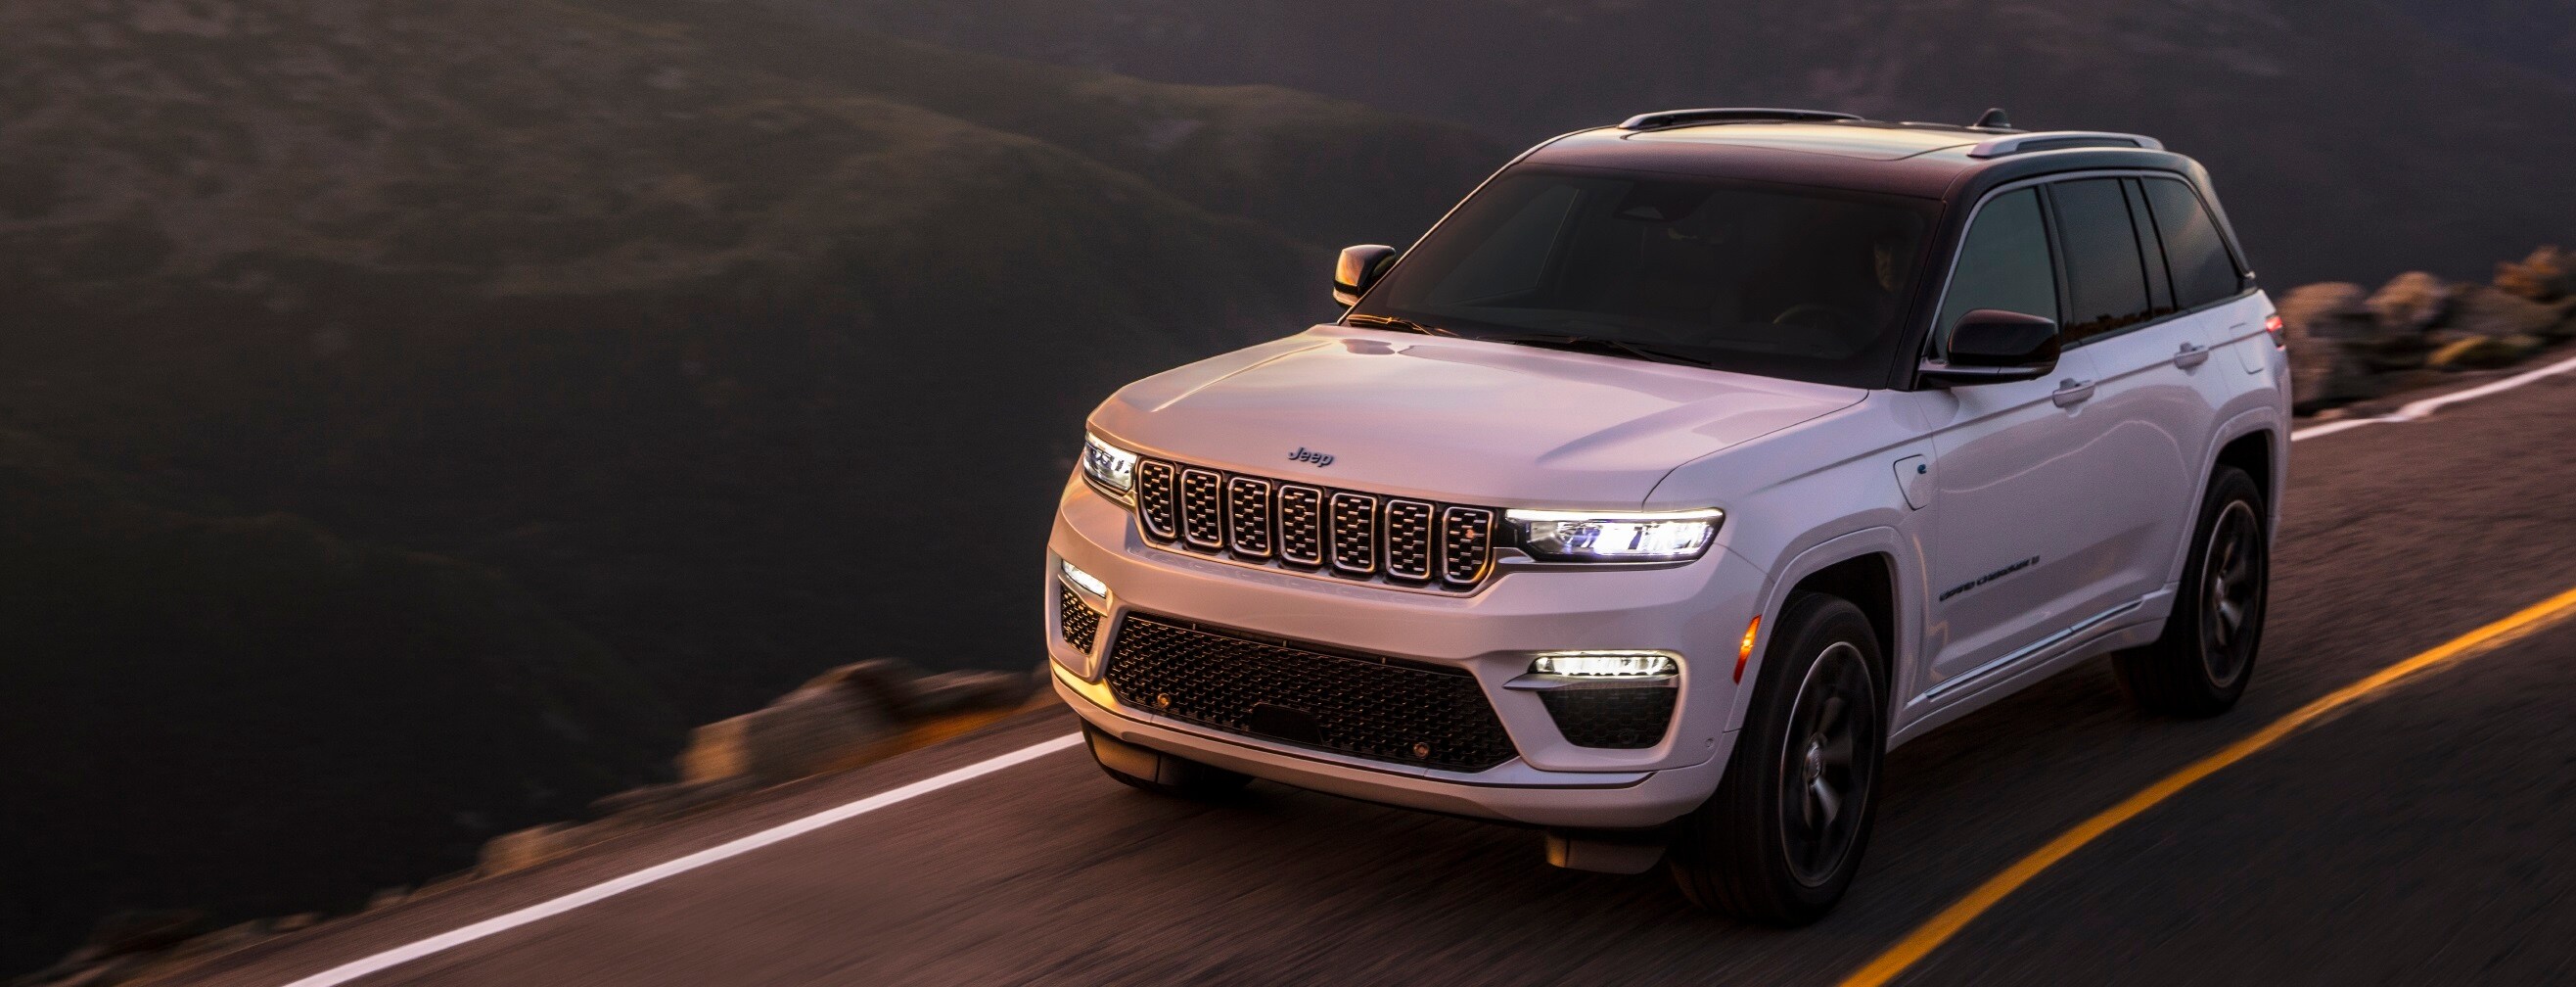 2022 Jeep Grand Cherokee For Sale In Ajax, Ontario